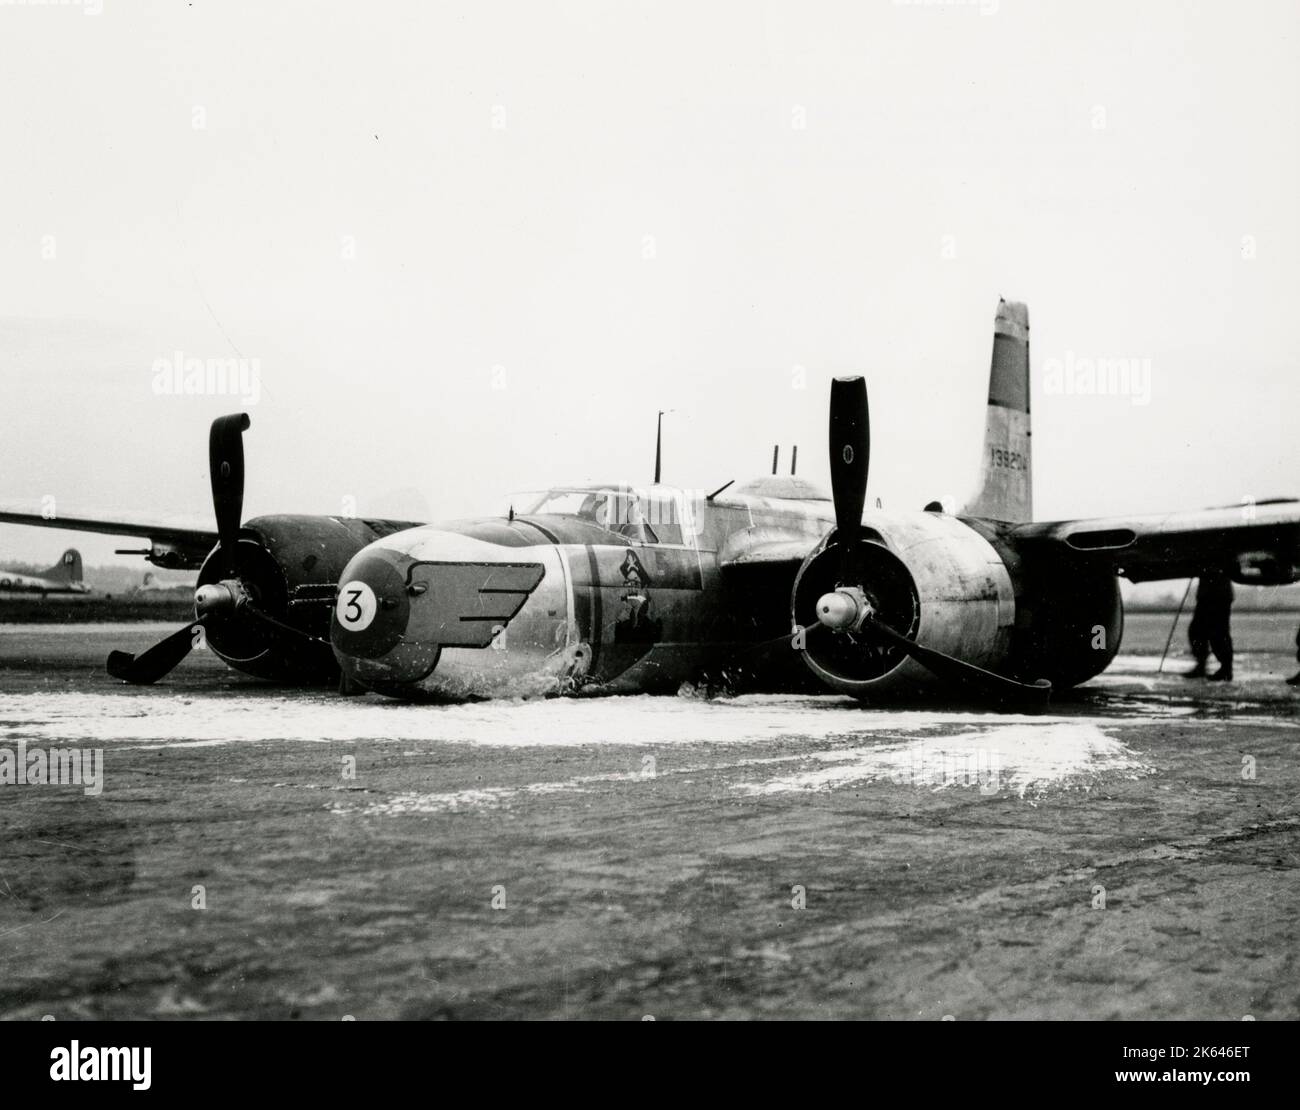 Vintage World War II photograph - official US military photo: wreck of a Douglas A-26 Invader of 386th bomb group after crash landing at its base in Beaumont France. Stock Photo